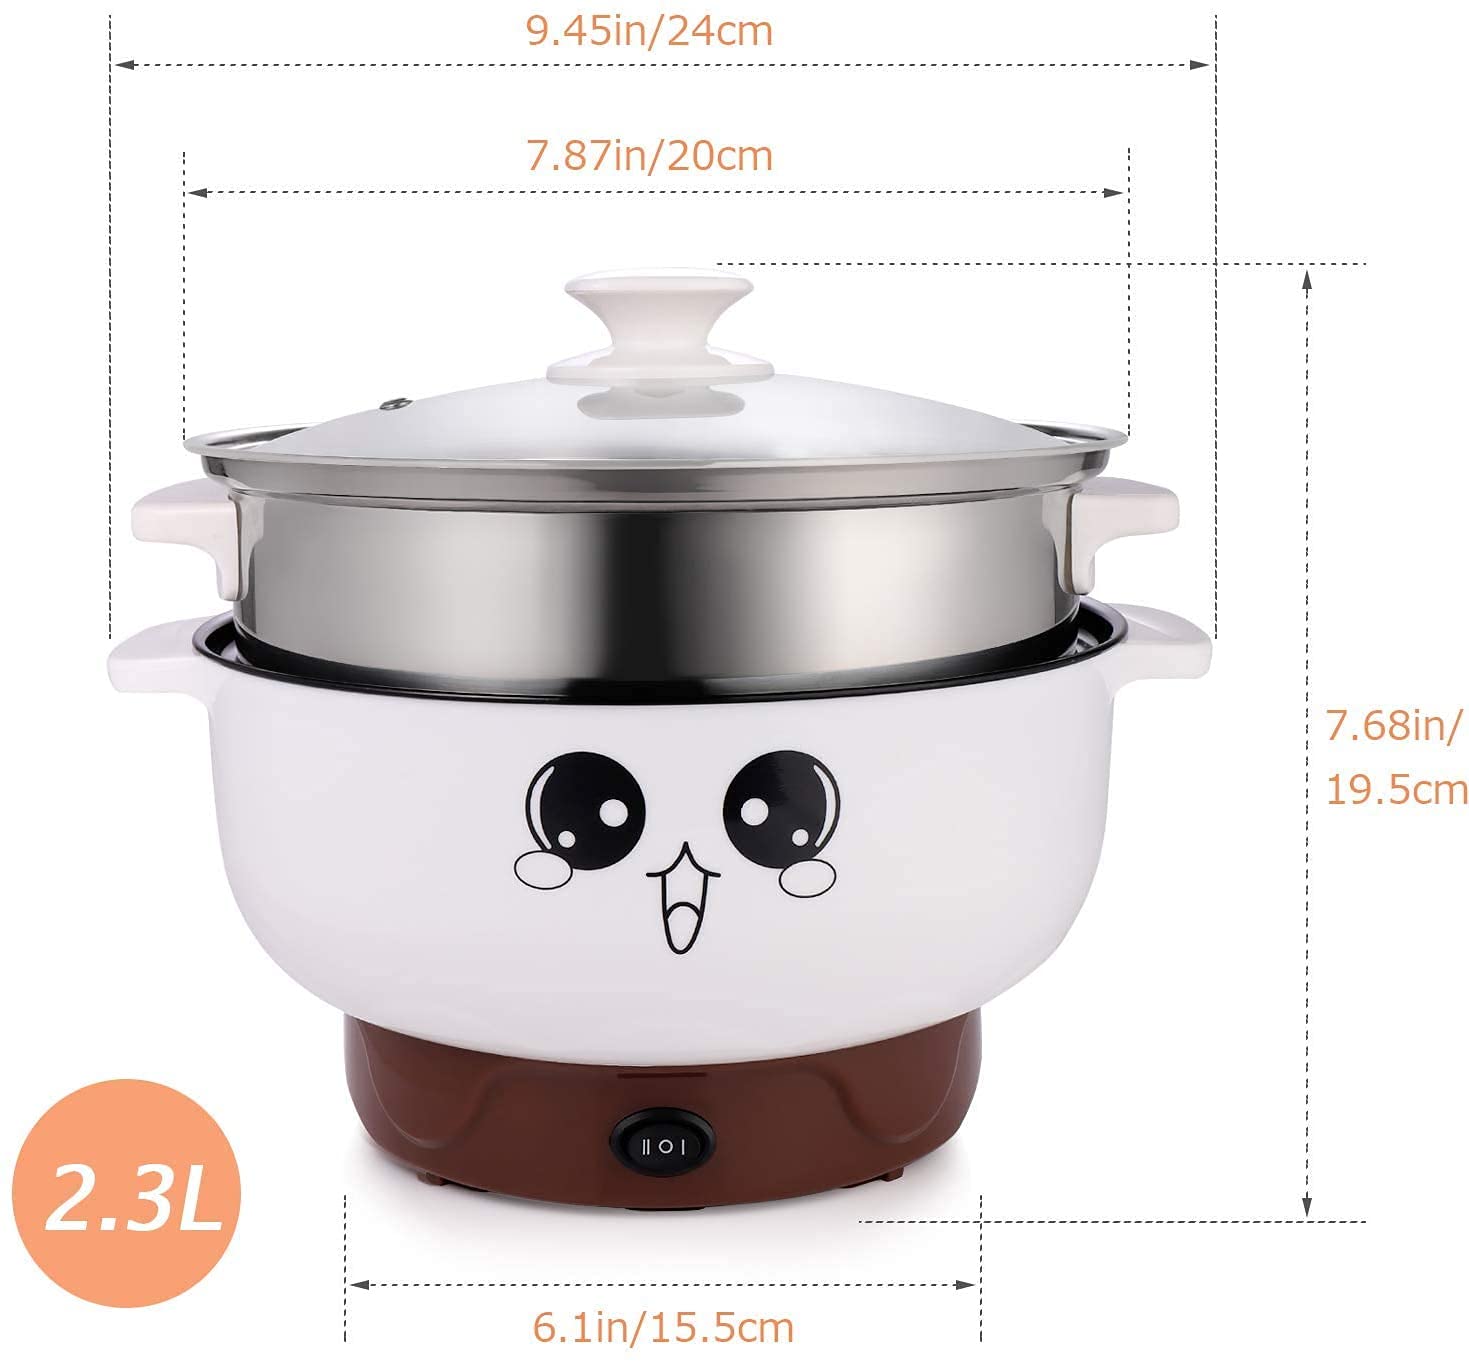 4-In-1 Multifunction Electric Stainless Steel Non-Stick Hot Pot Cooker 2.3L Portable Skillet Grill Pot Heating Pan for Noodles Cook Rice Soup